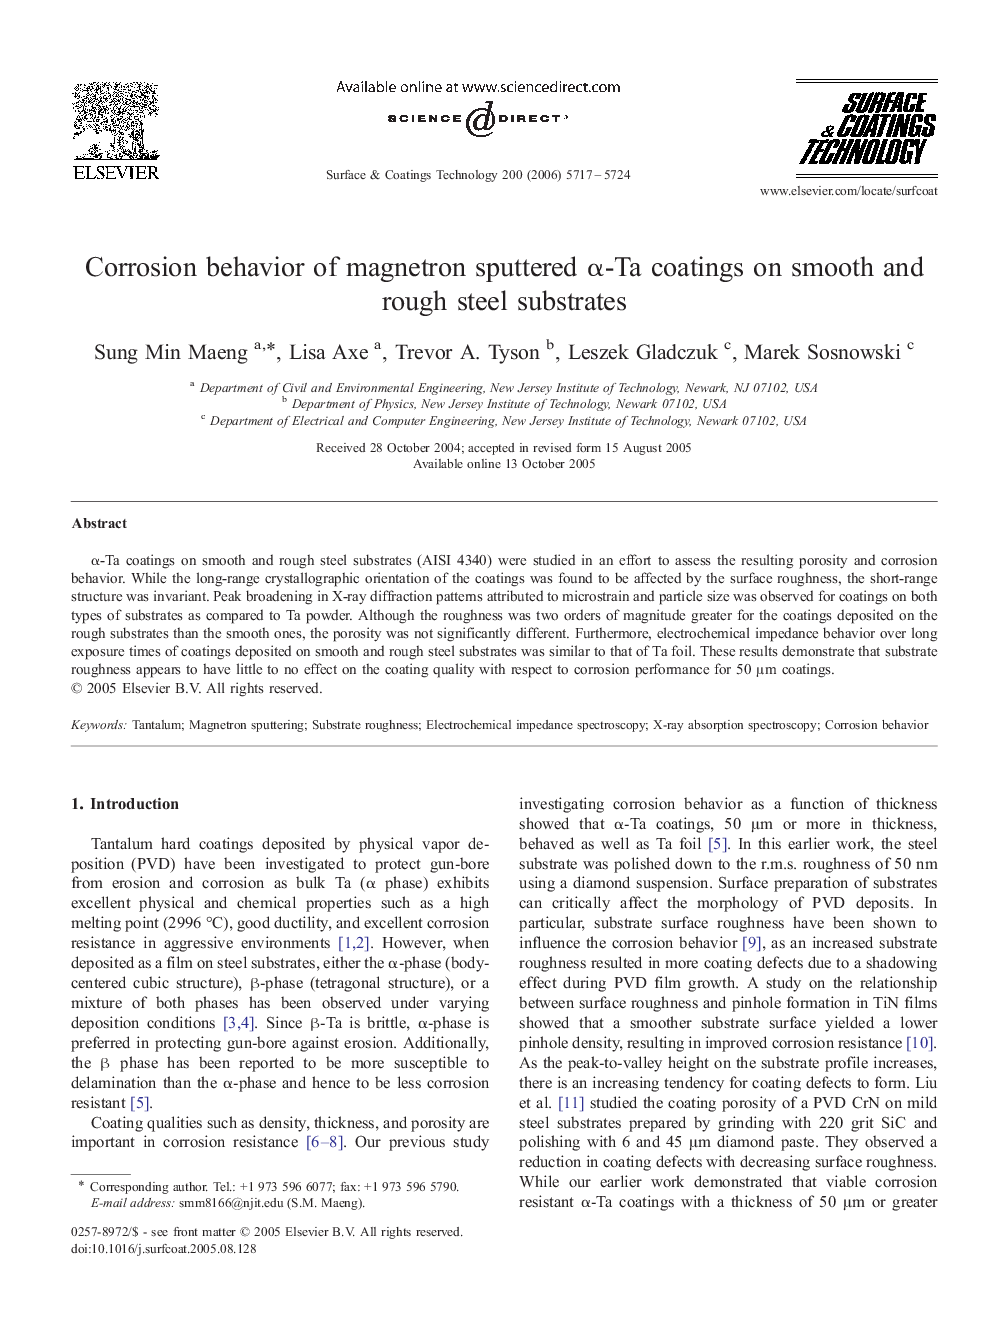 Corrosion behavior of magnetron sputtered Î±-Ta coatings on smooth and rough steel substrates